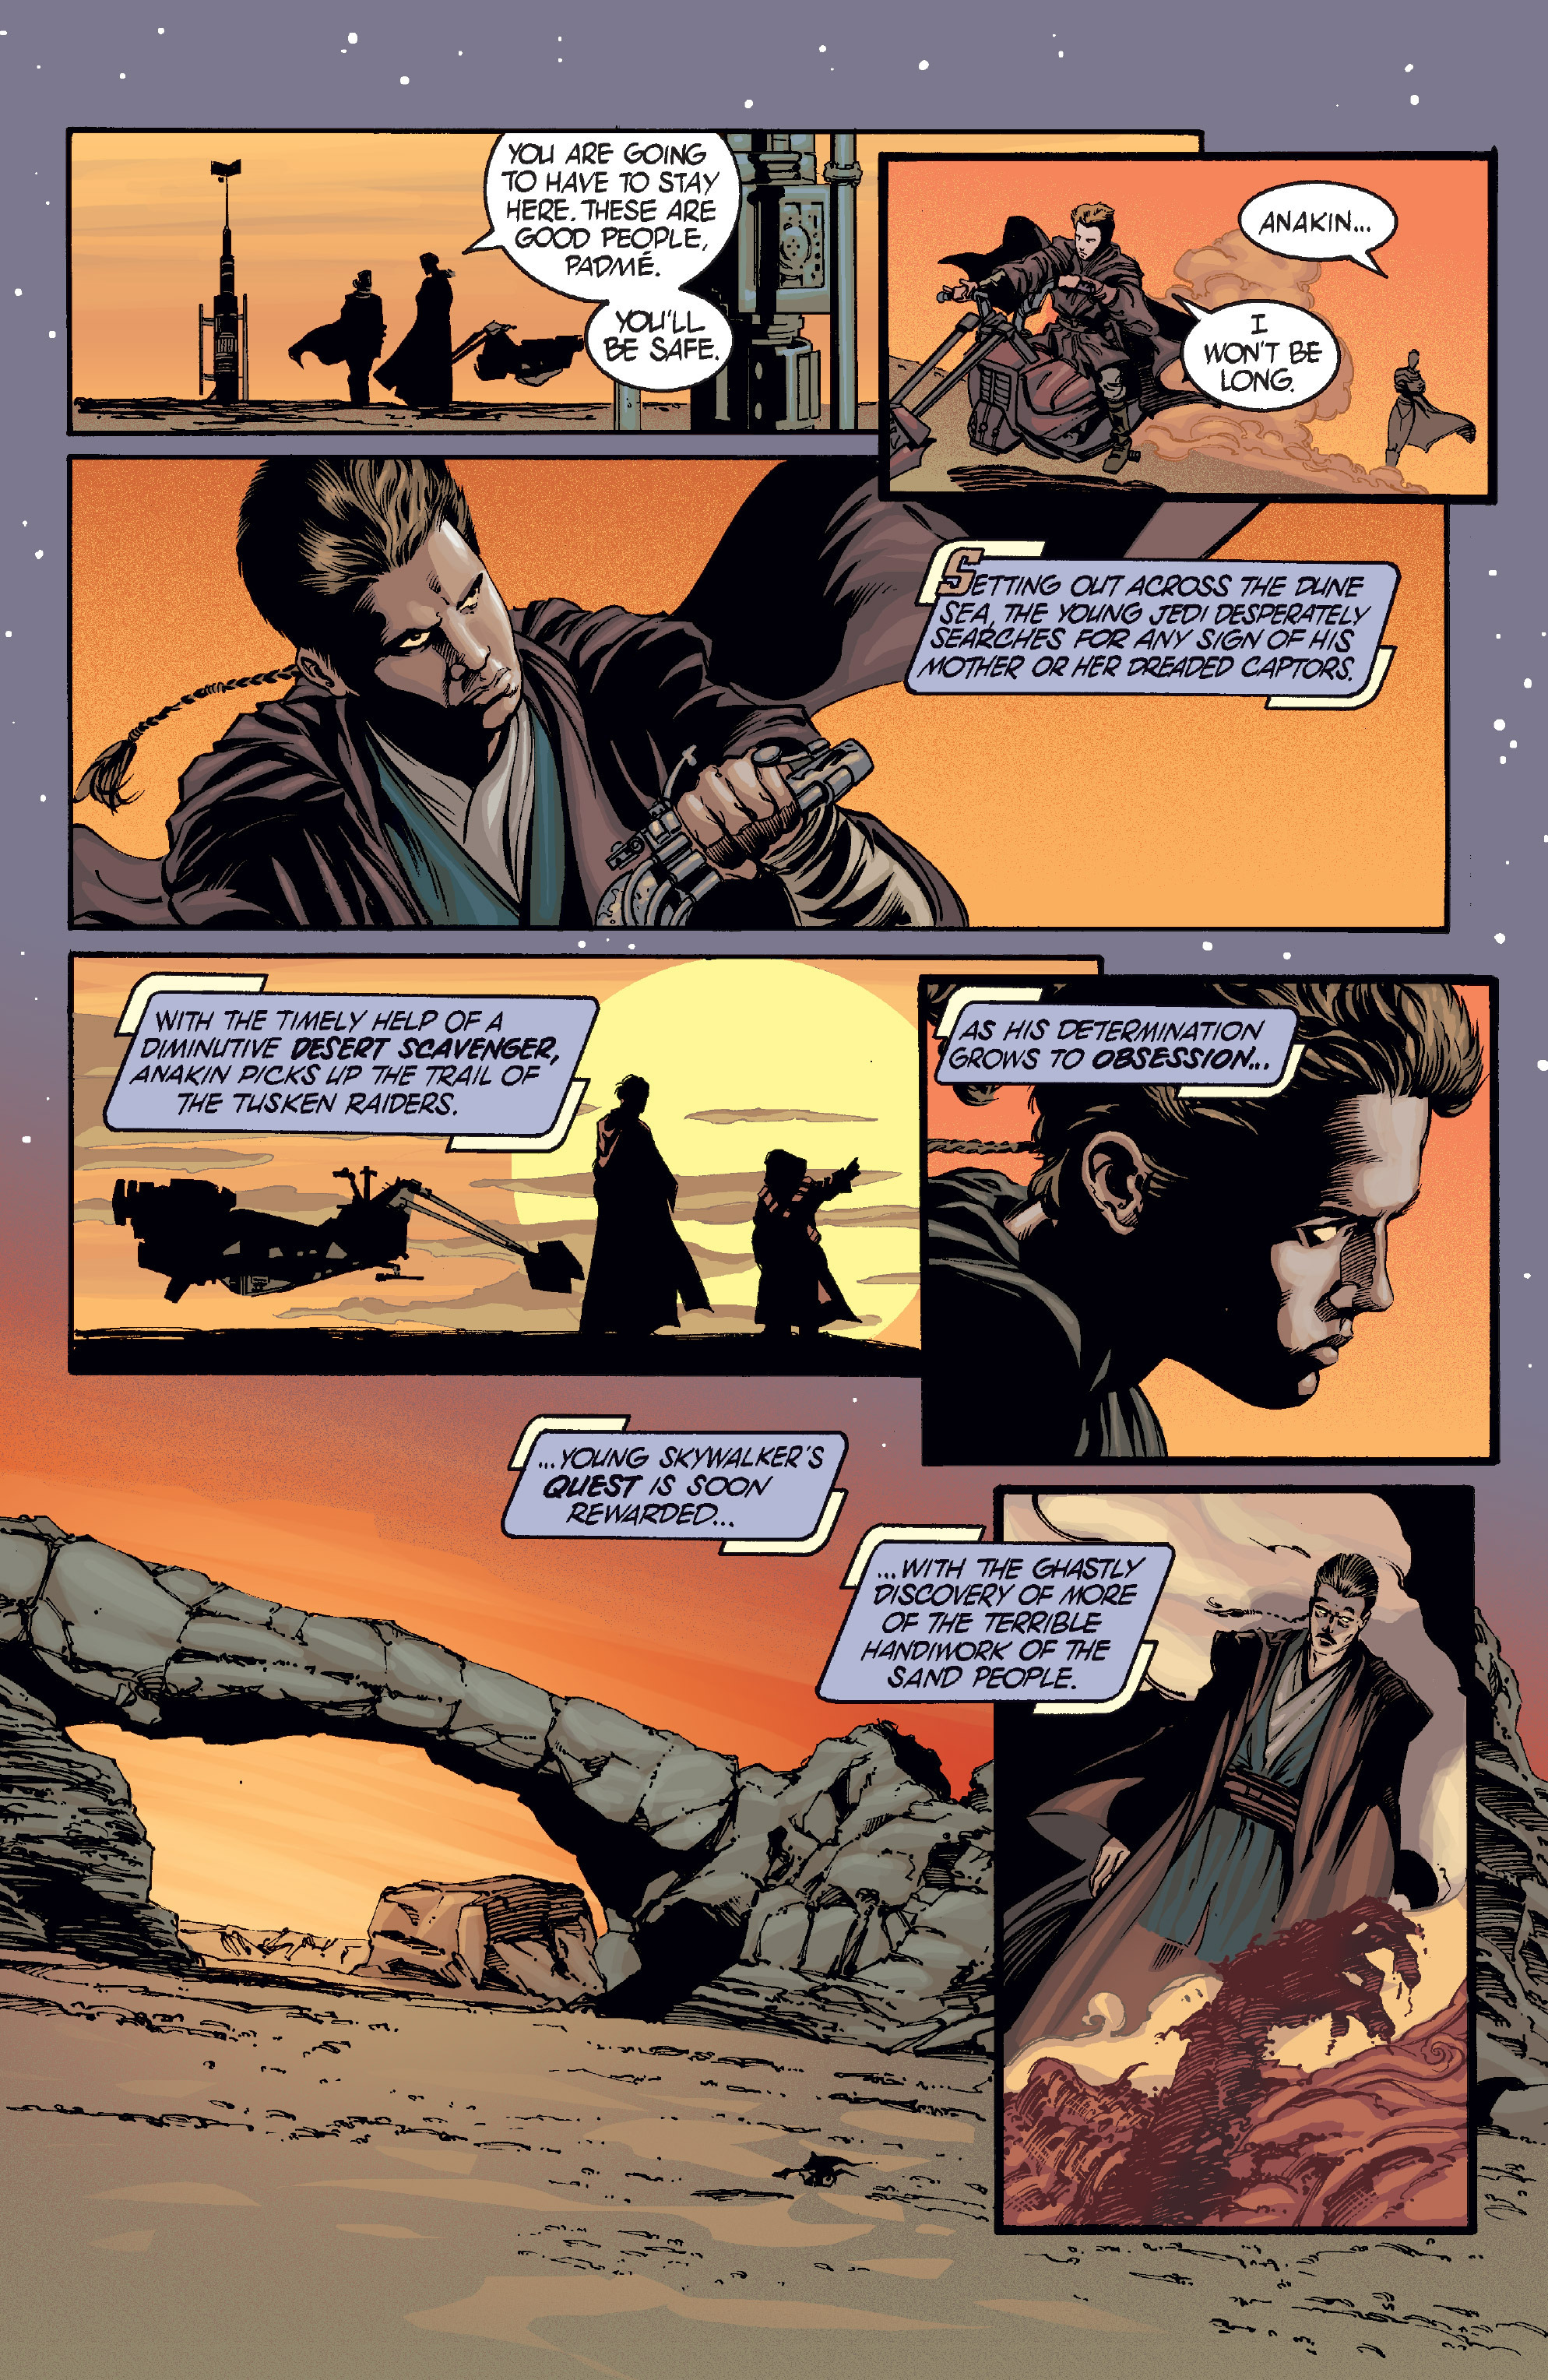 Read online Star Wars: Episode II - Attack of the Clones comic -  Issue #3 - 11